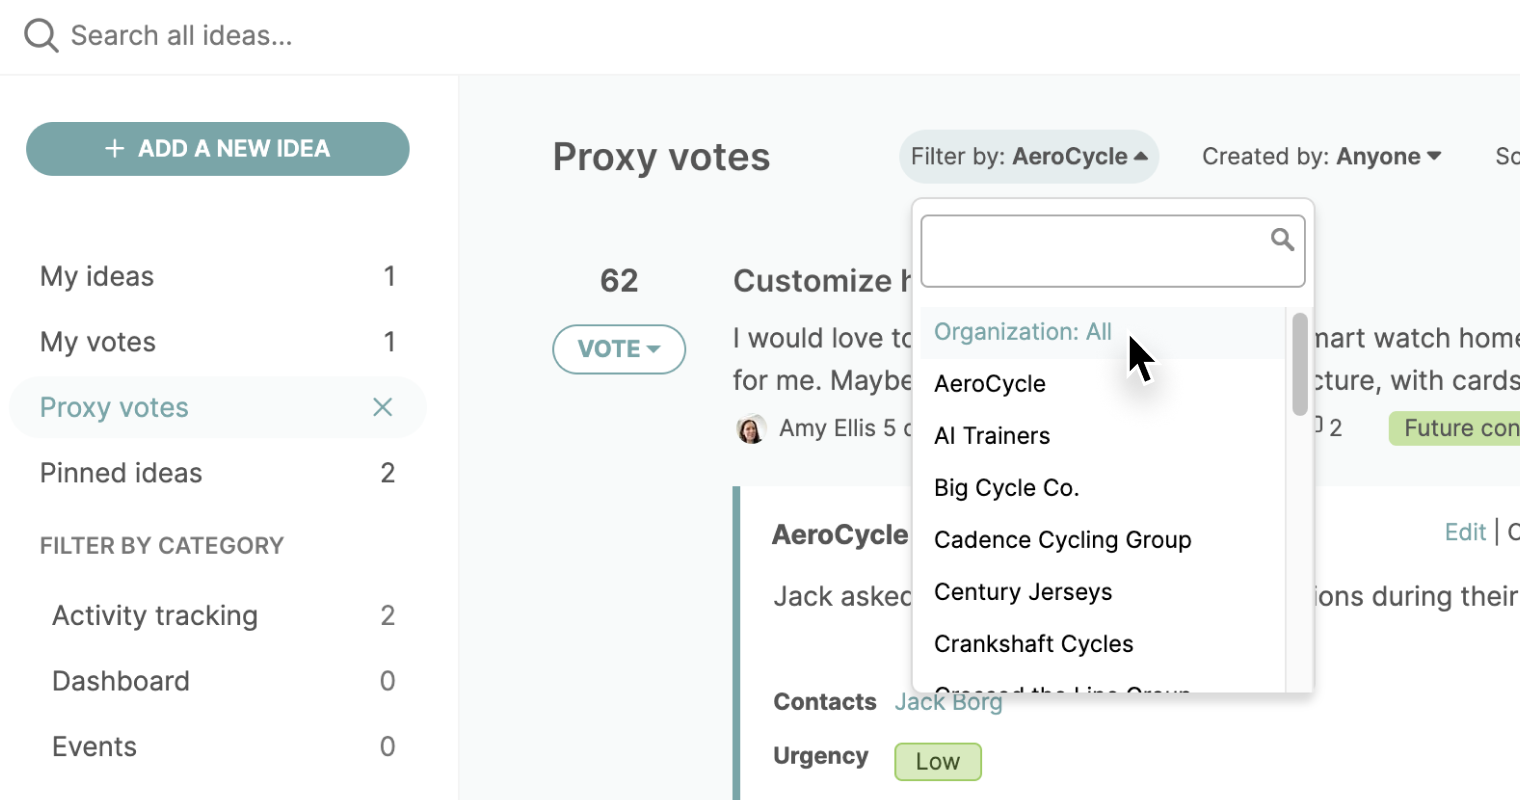 Hero image for the Greater Proxy Voting Visibility on Ideas blog post